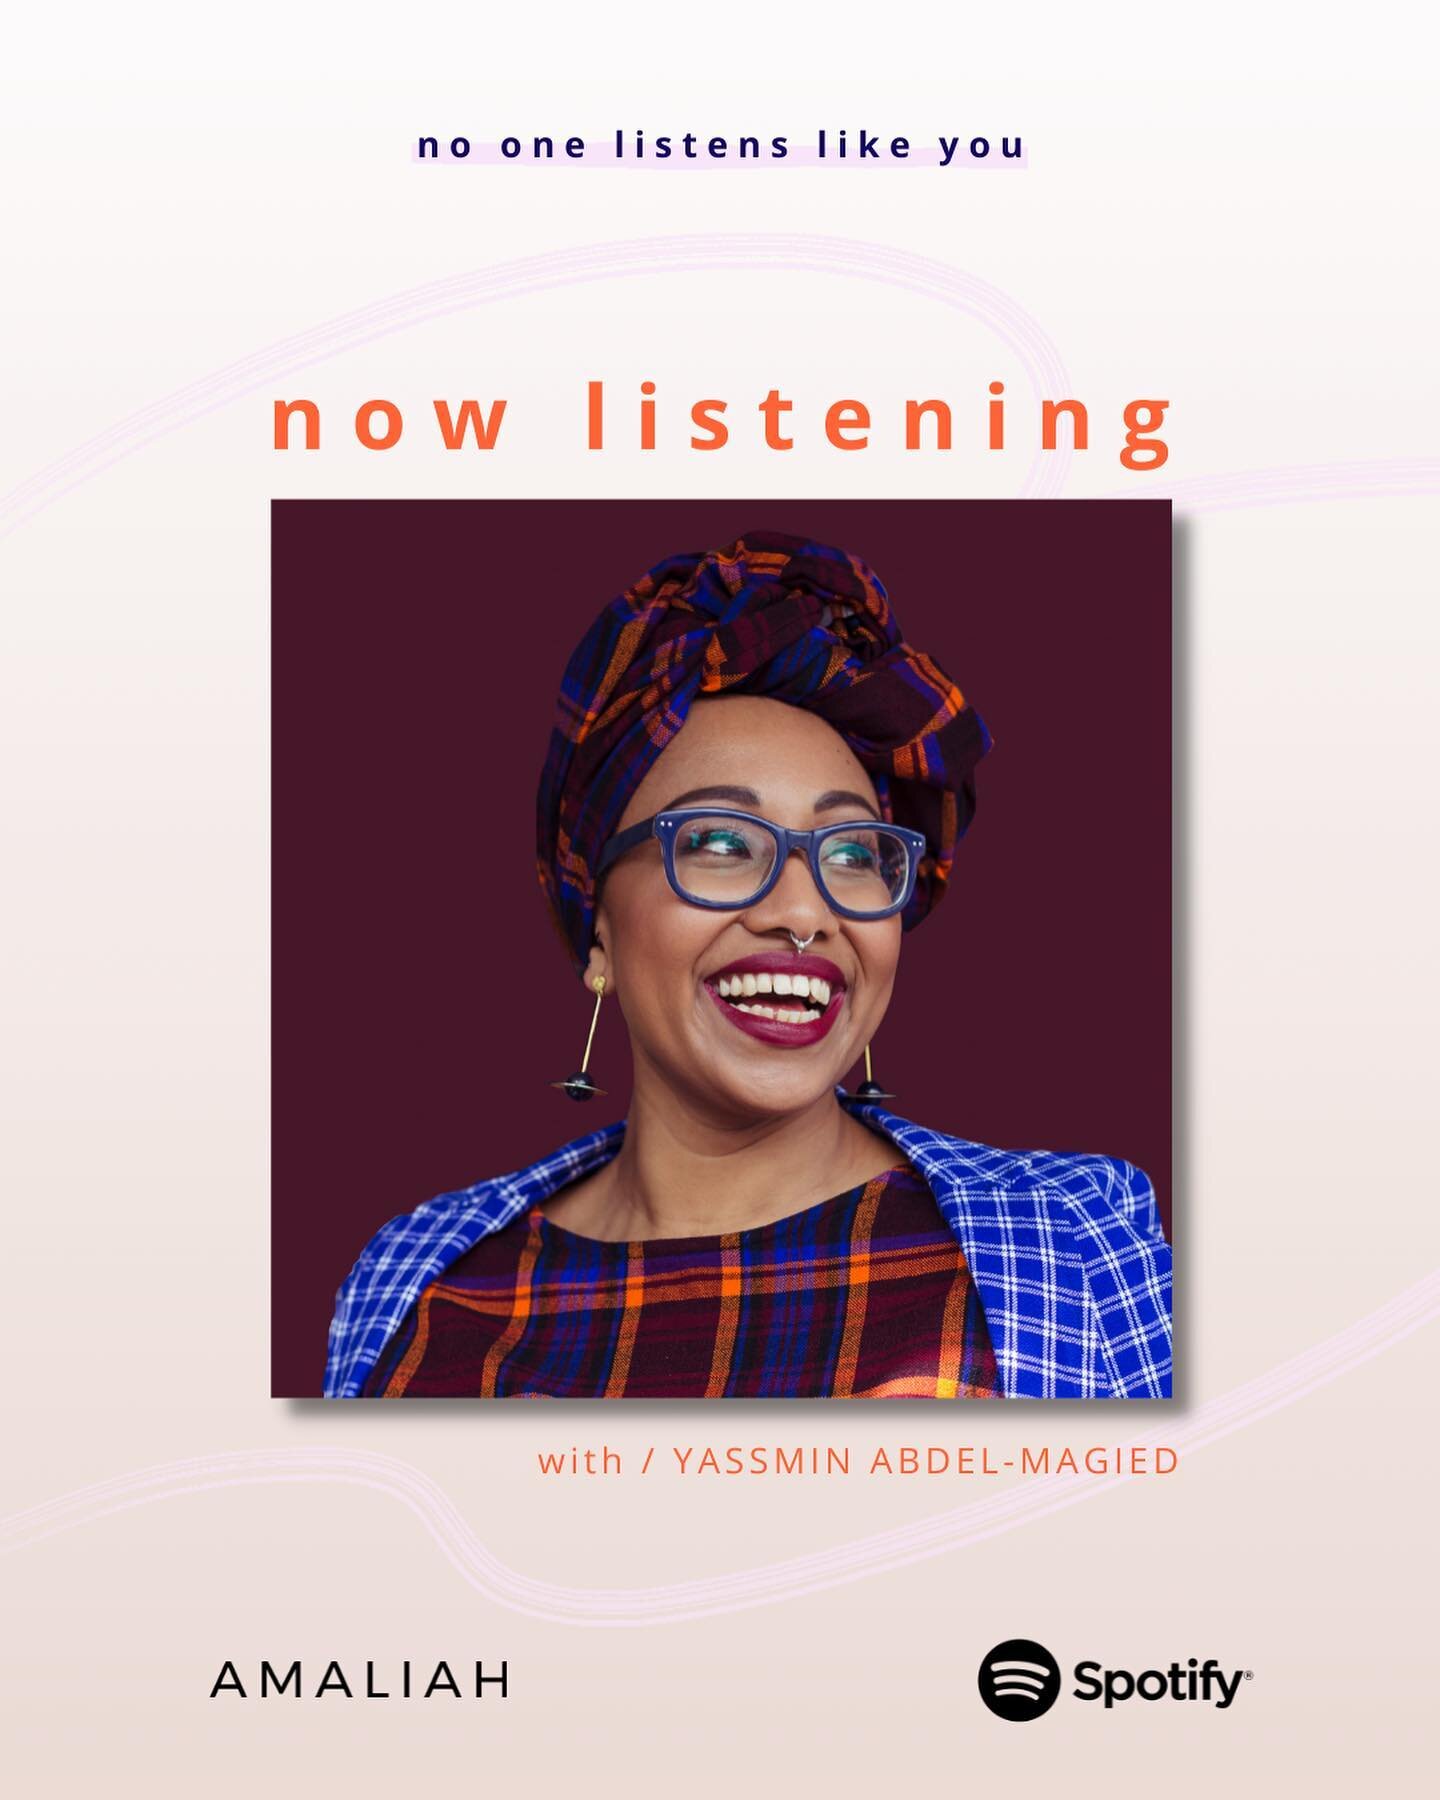 Anyone who knows anything about my listening habits knows that I love good podcast. Yes, I am that sis who&rsquo;s like &lsquo;oh, I was listening to a podcast about just that recently&hellip;&rsquo; and proceeds to send you three niche recommendatio